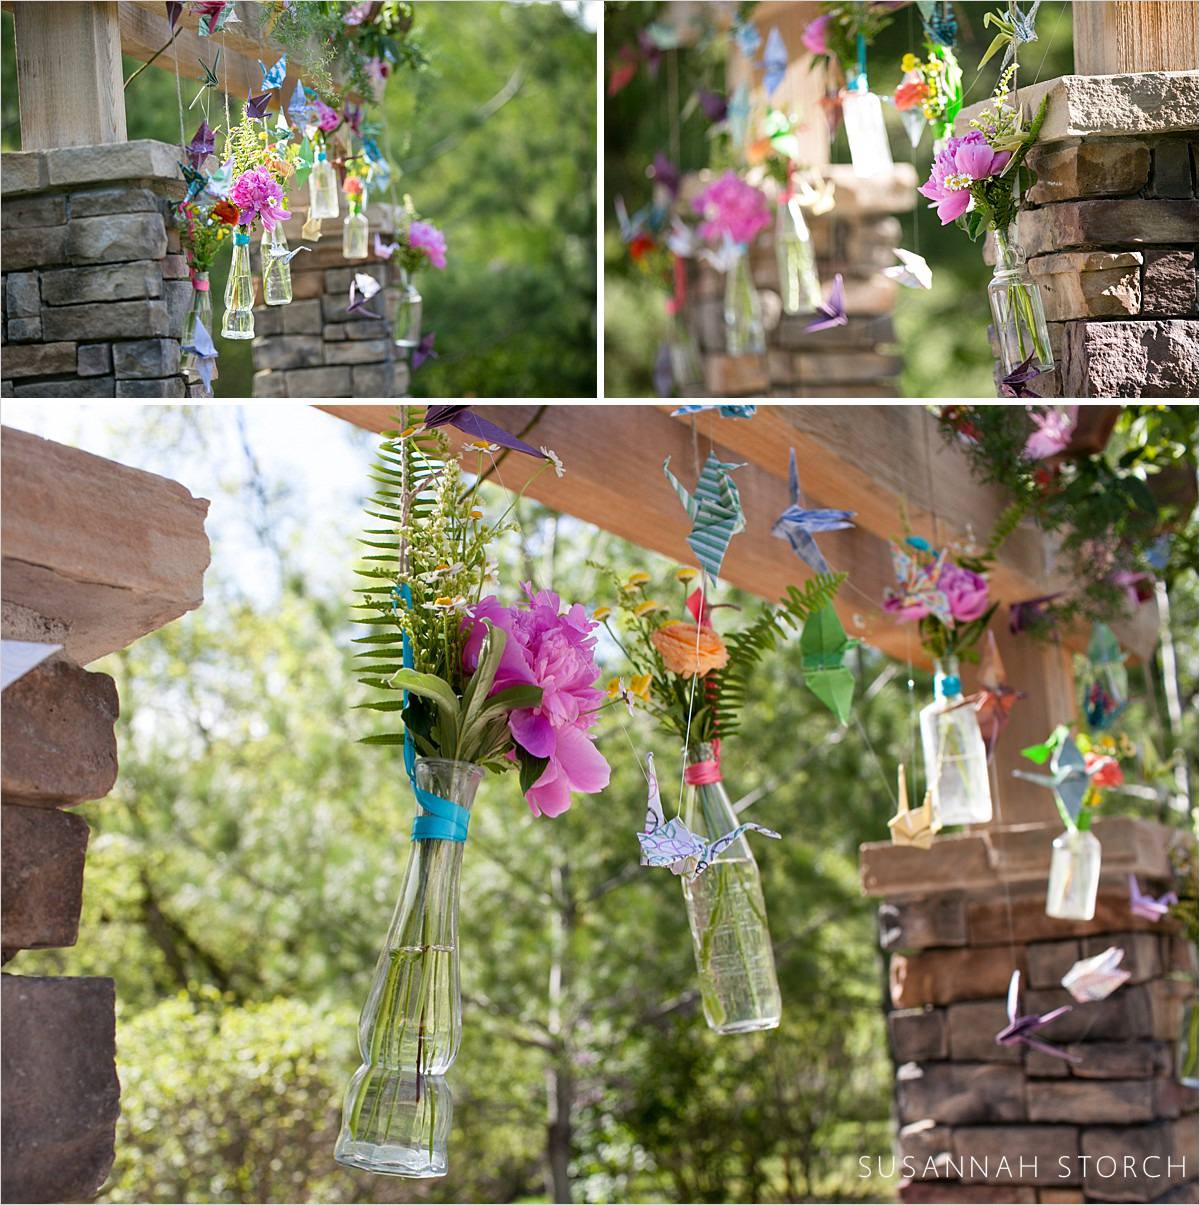 photos of colorful flowers in glass vases on an alter during a wedding at wedgwood creek